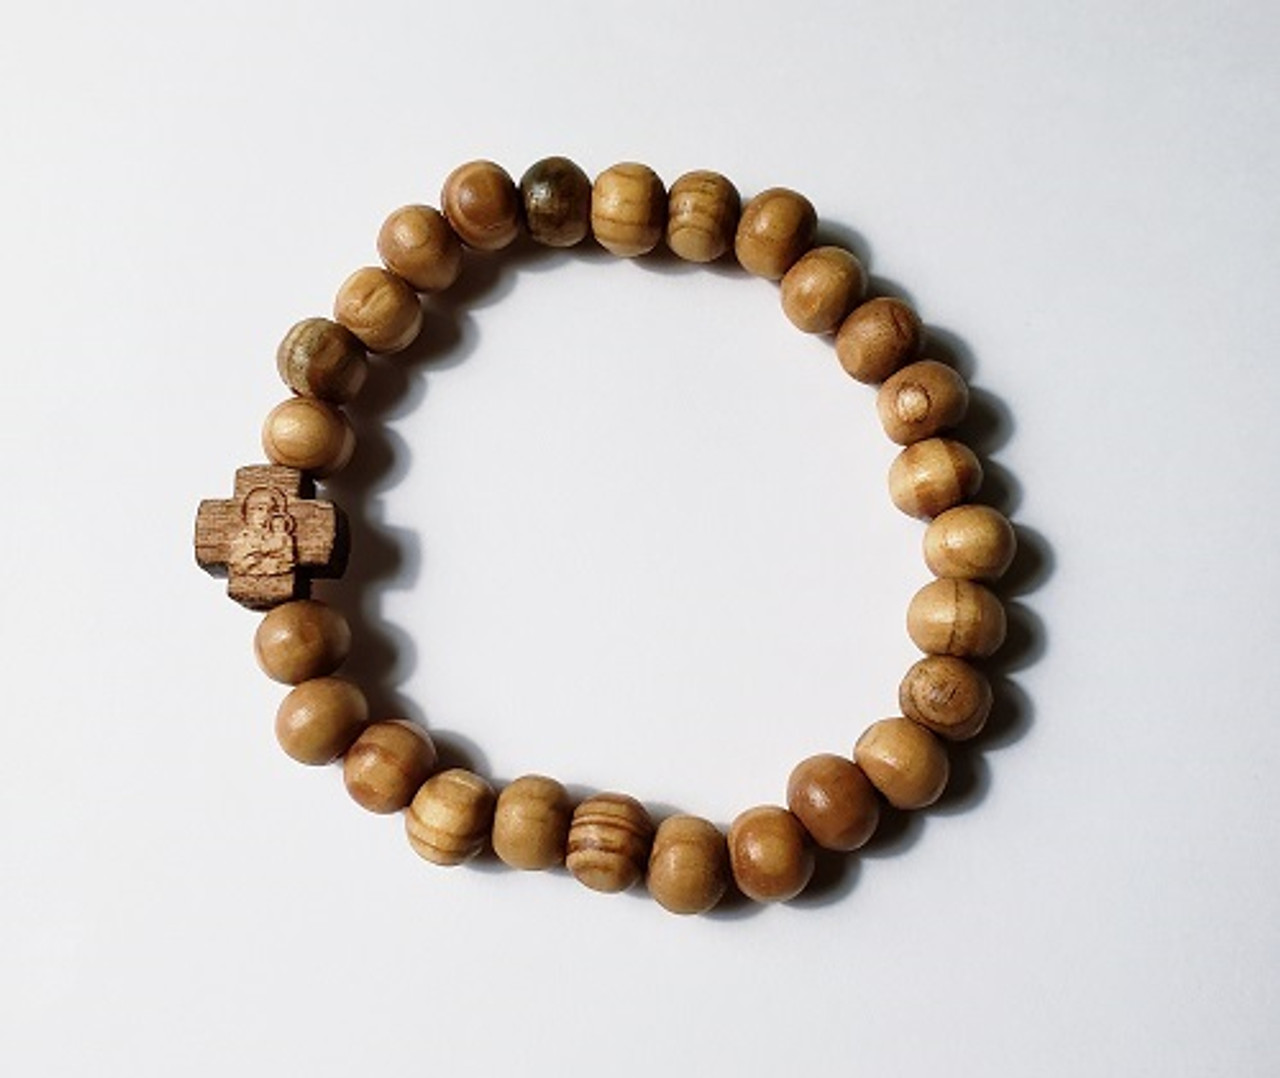 Prayer Bracelet with olive wood beads, wooden cross - Ancient Faith Store